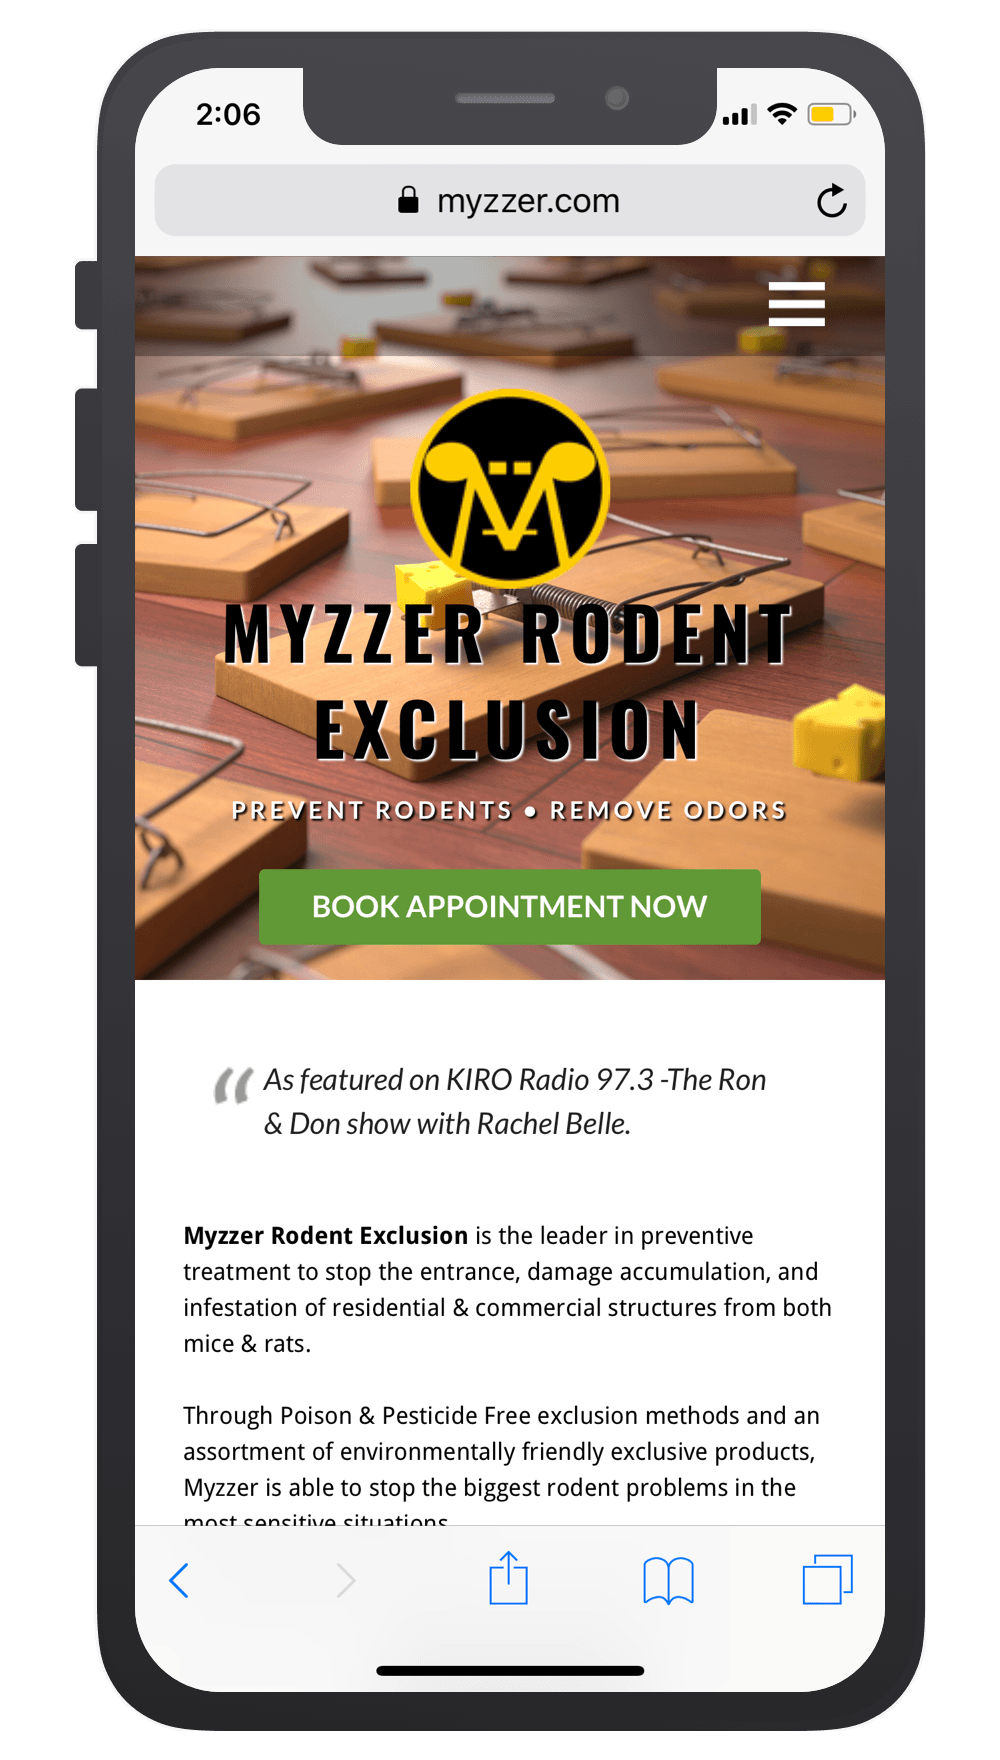 Myzzer Rodent Exclusion